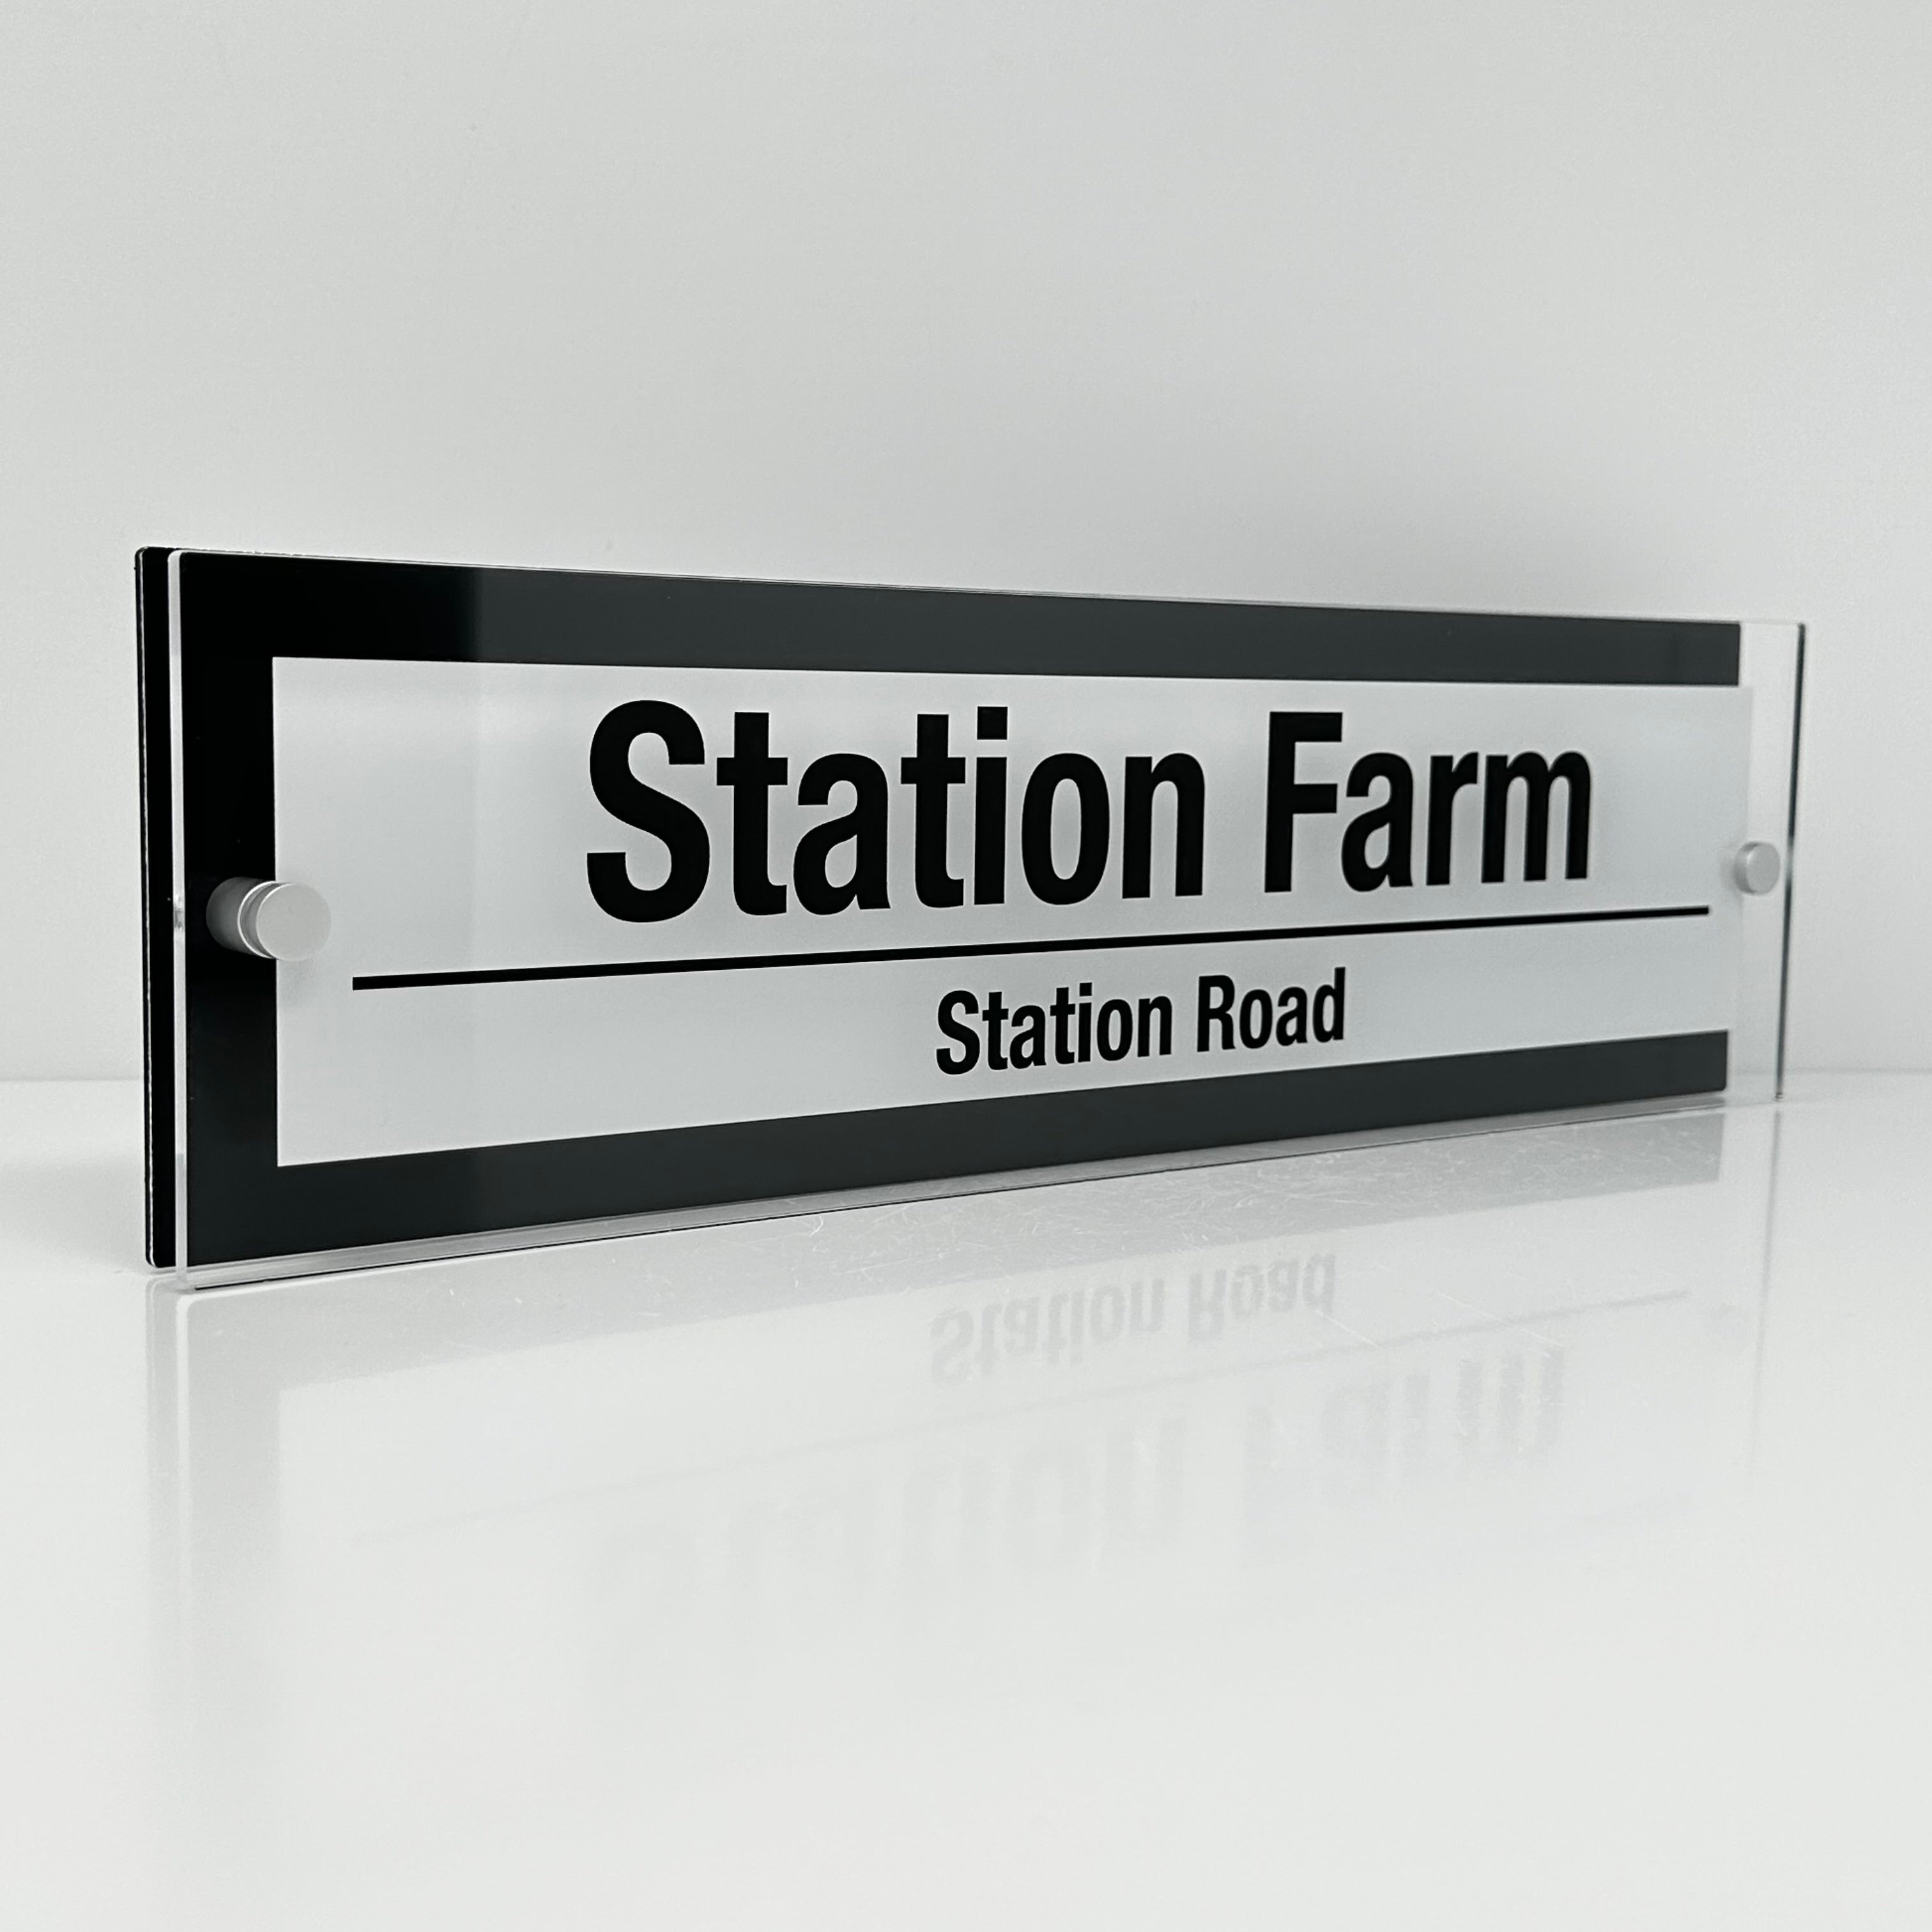 The Station Farm Modern House Sign with Perspex Acrylic Front, Anthracite Grey Rear Panel and Satin Silver Stand Off Fixings ( Size - 42cm x 12cm - WHITE BACKGROUND BLACK TEXT )